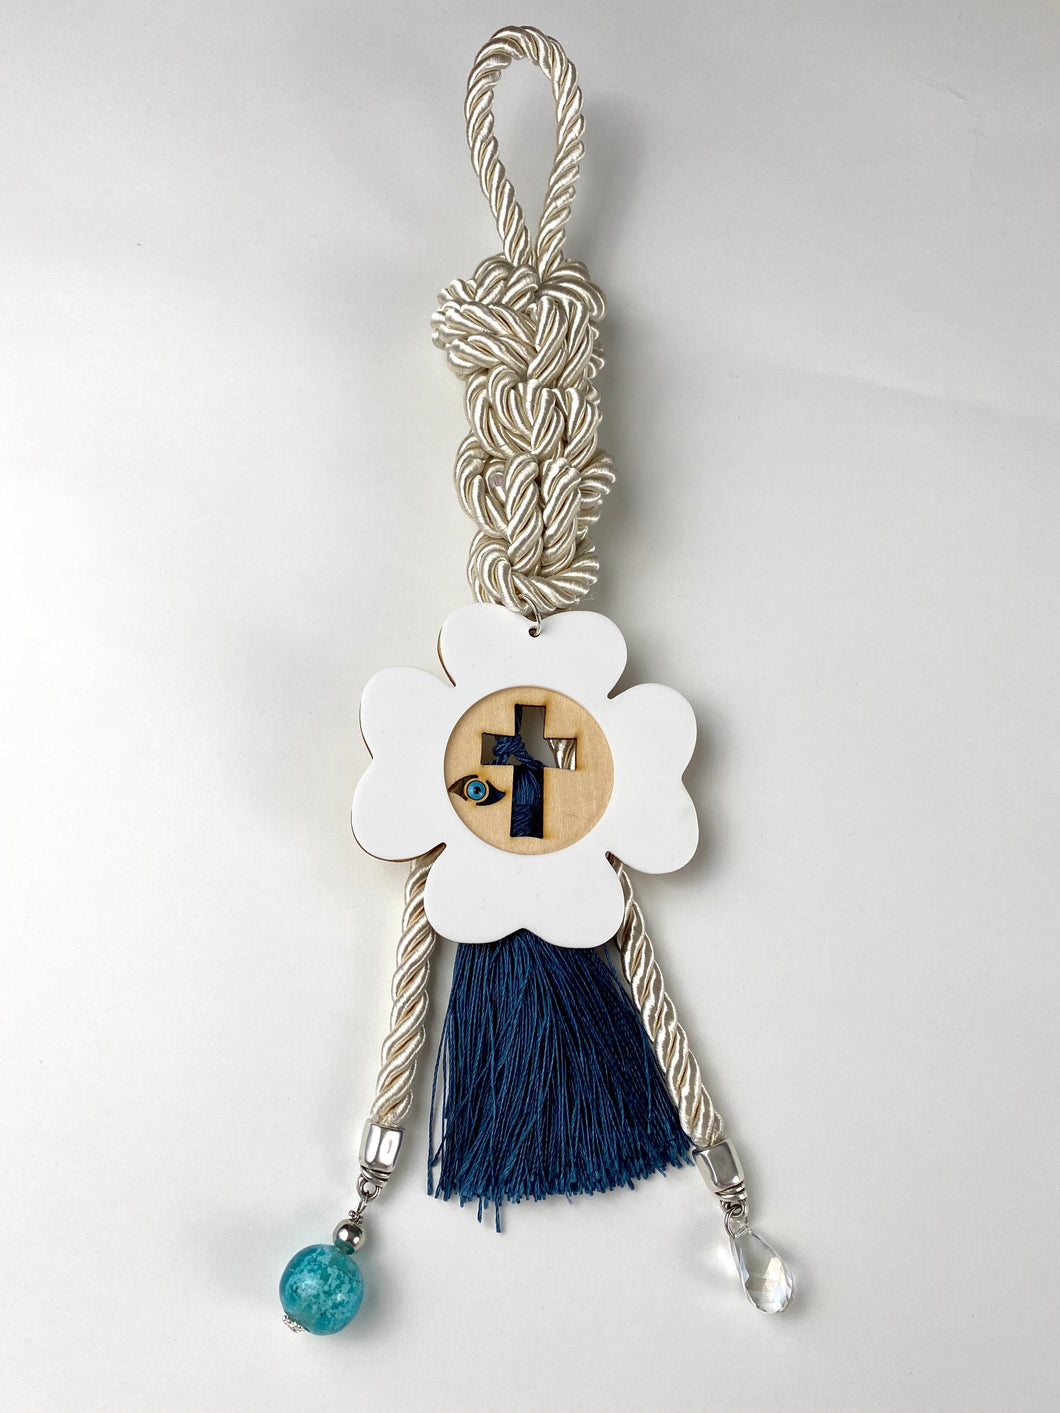 Gouri 1028 Pearl cord Gouri, large acrylic 4 leaf clover cross with Mati bead, Murano glass beads, with large tassel. 15” in length